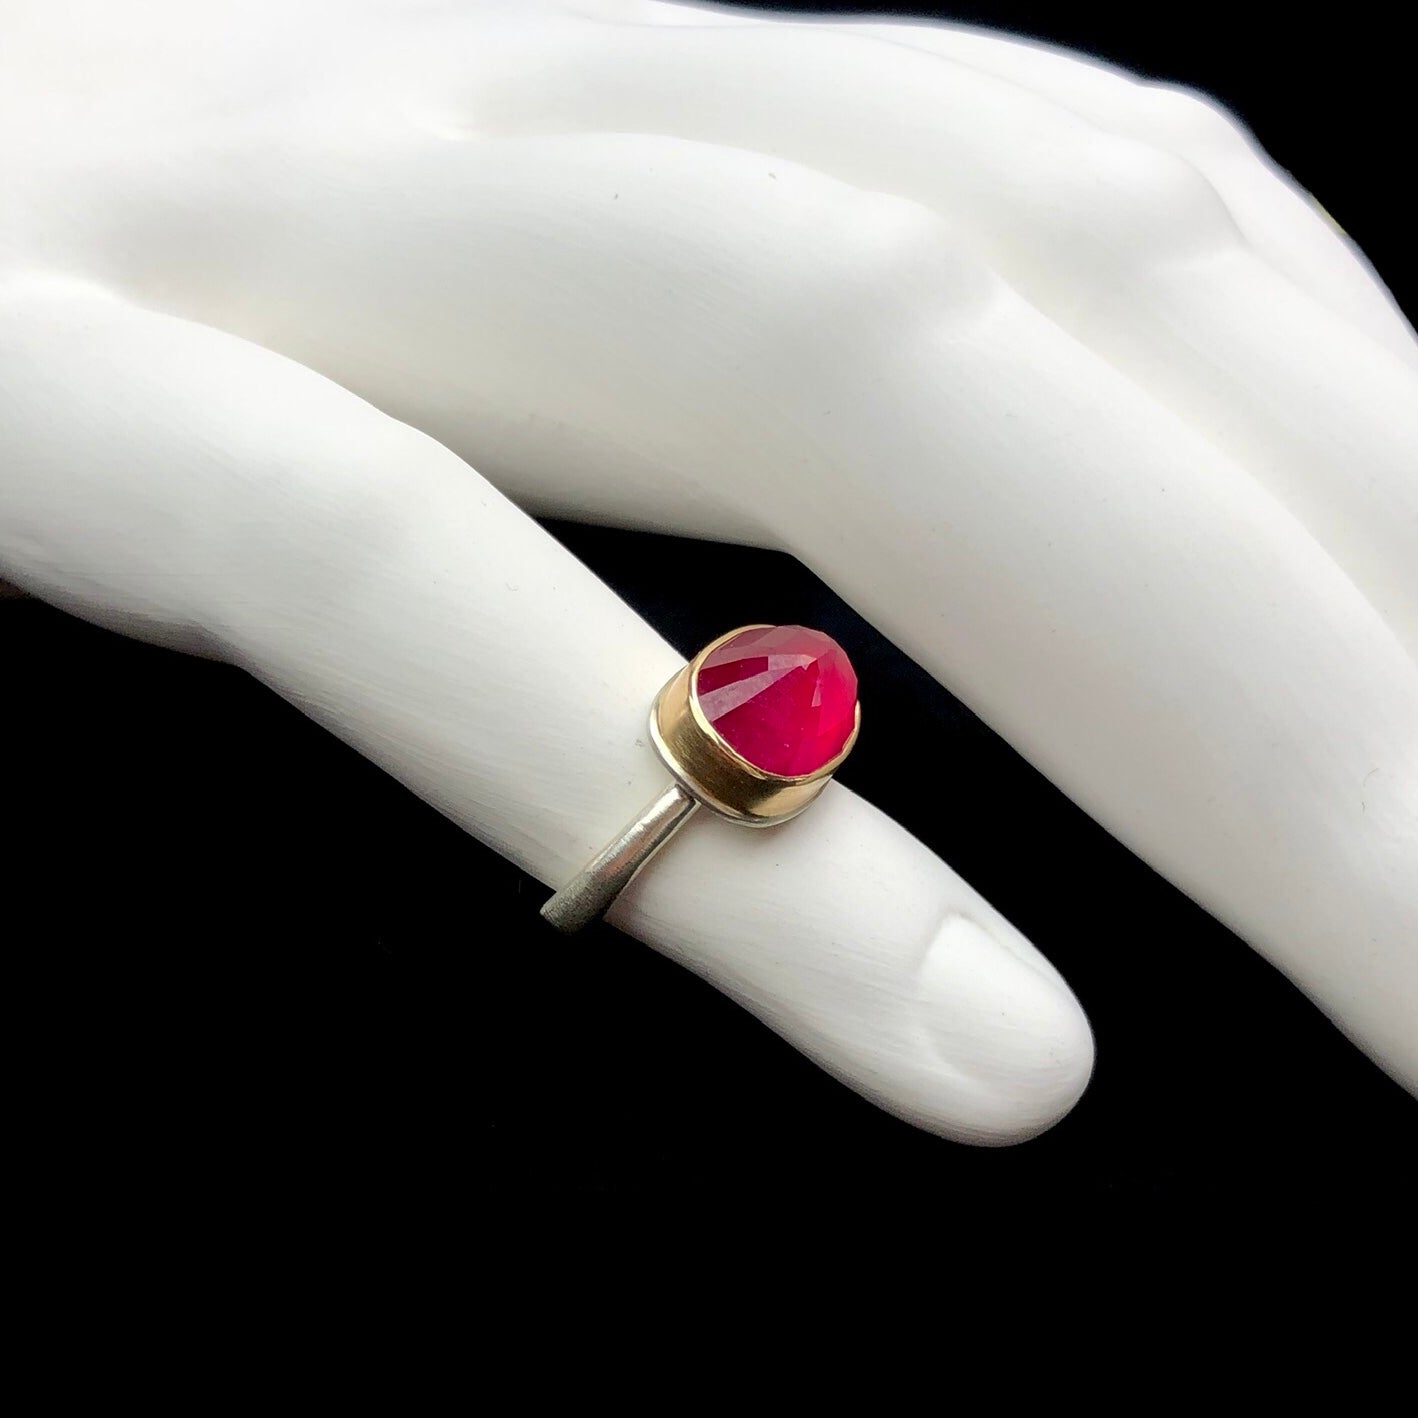 Side profile view of faceted, raised pink/red colored ruby stone ring shown on white ceramic finger